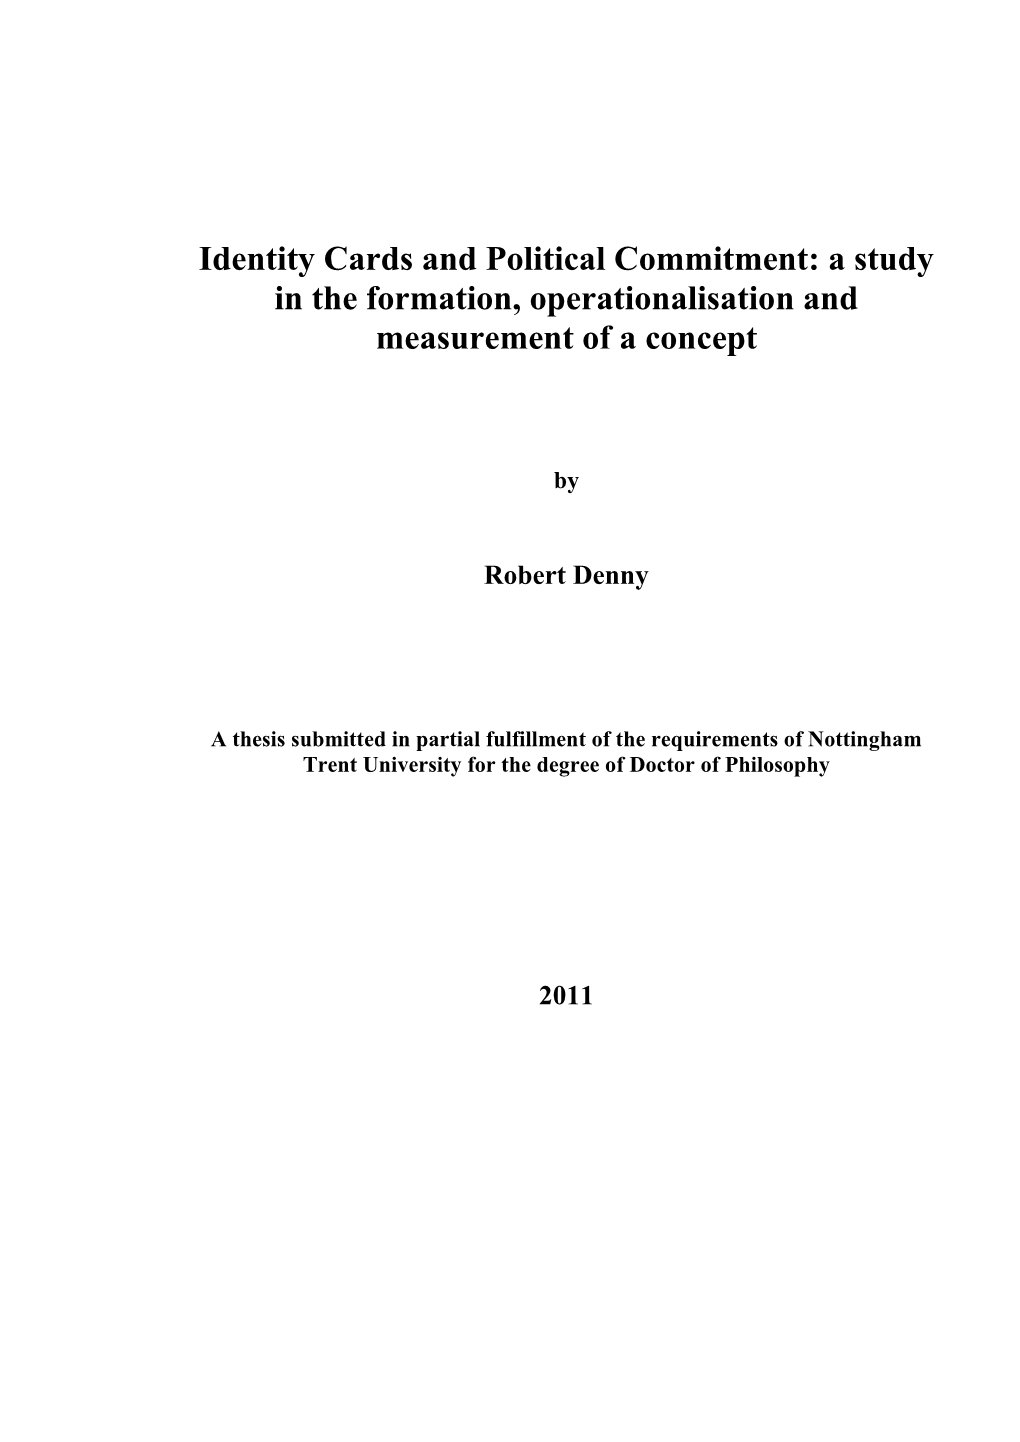 Identity Cards and Political Commitment: a Study in the Formation, Operationalisation and Measurement of a Concept